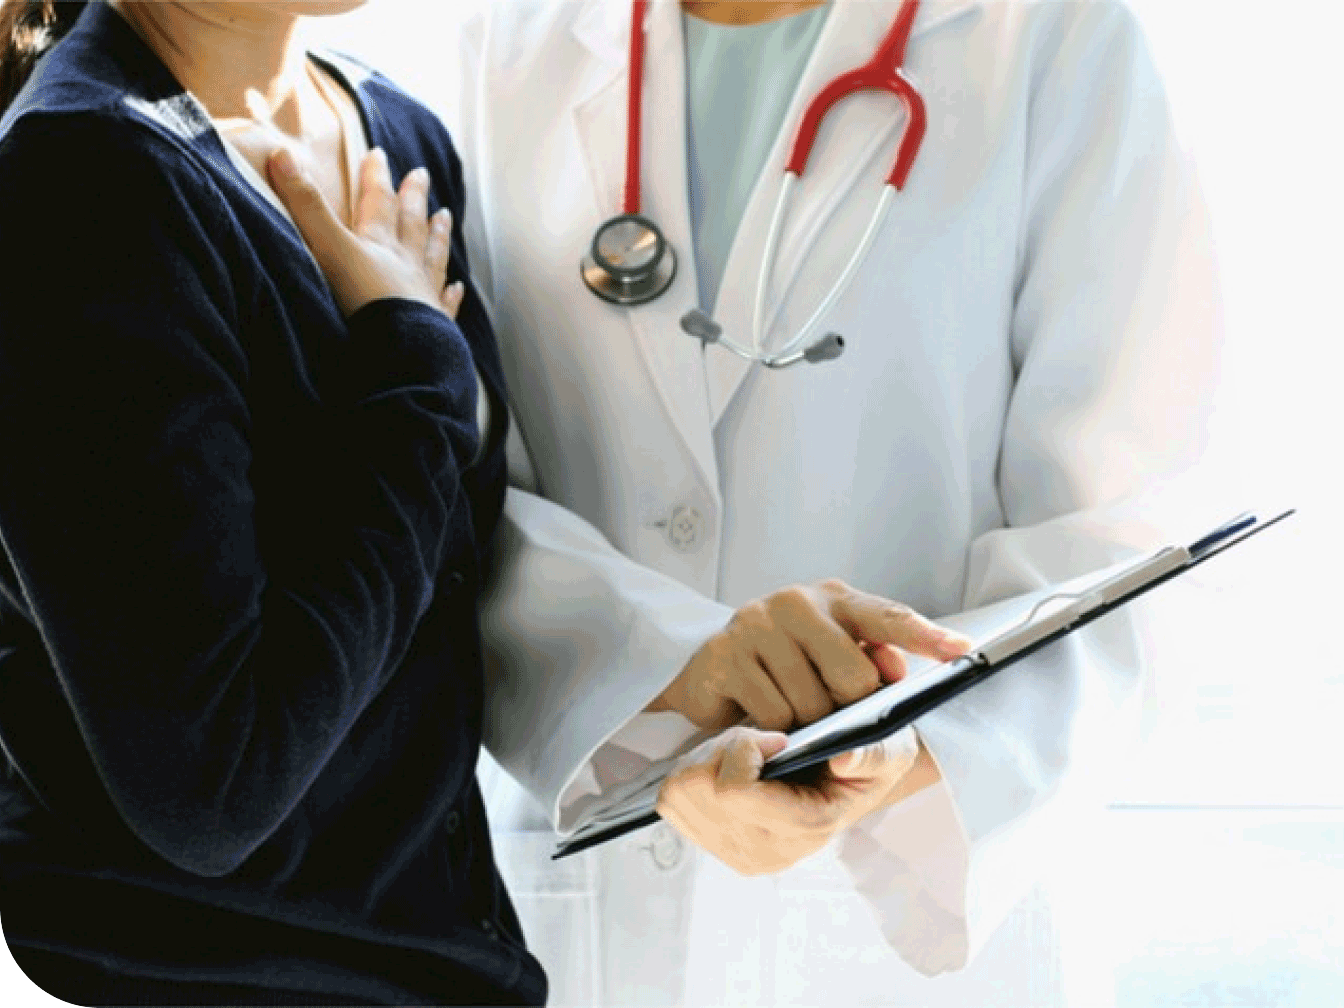 Doctor speaking with a patient